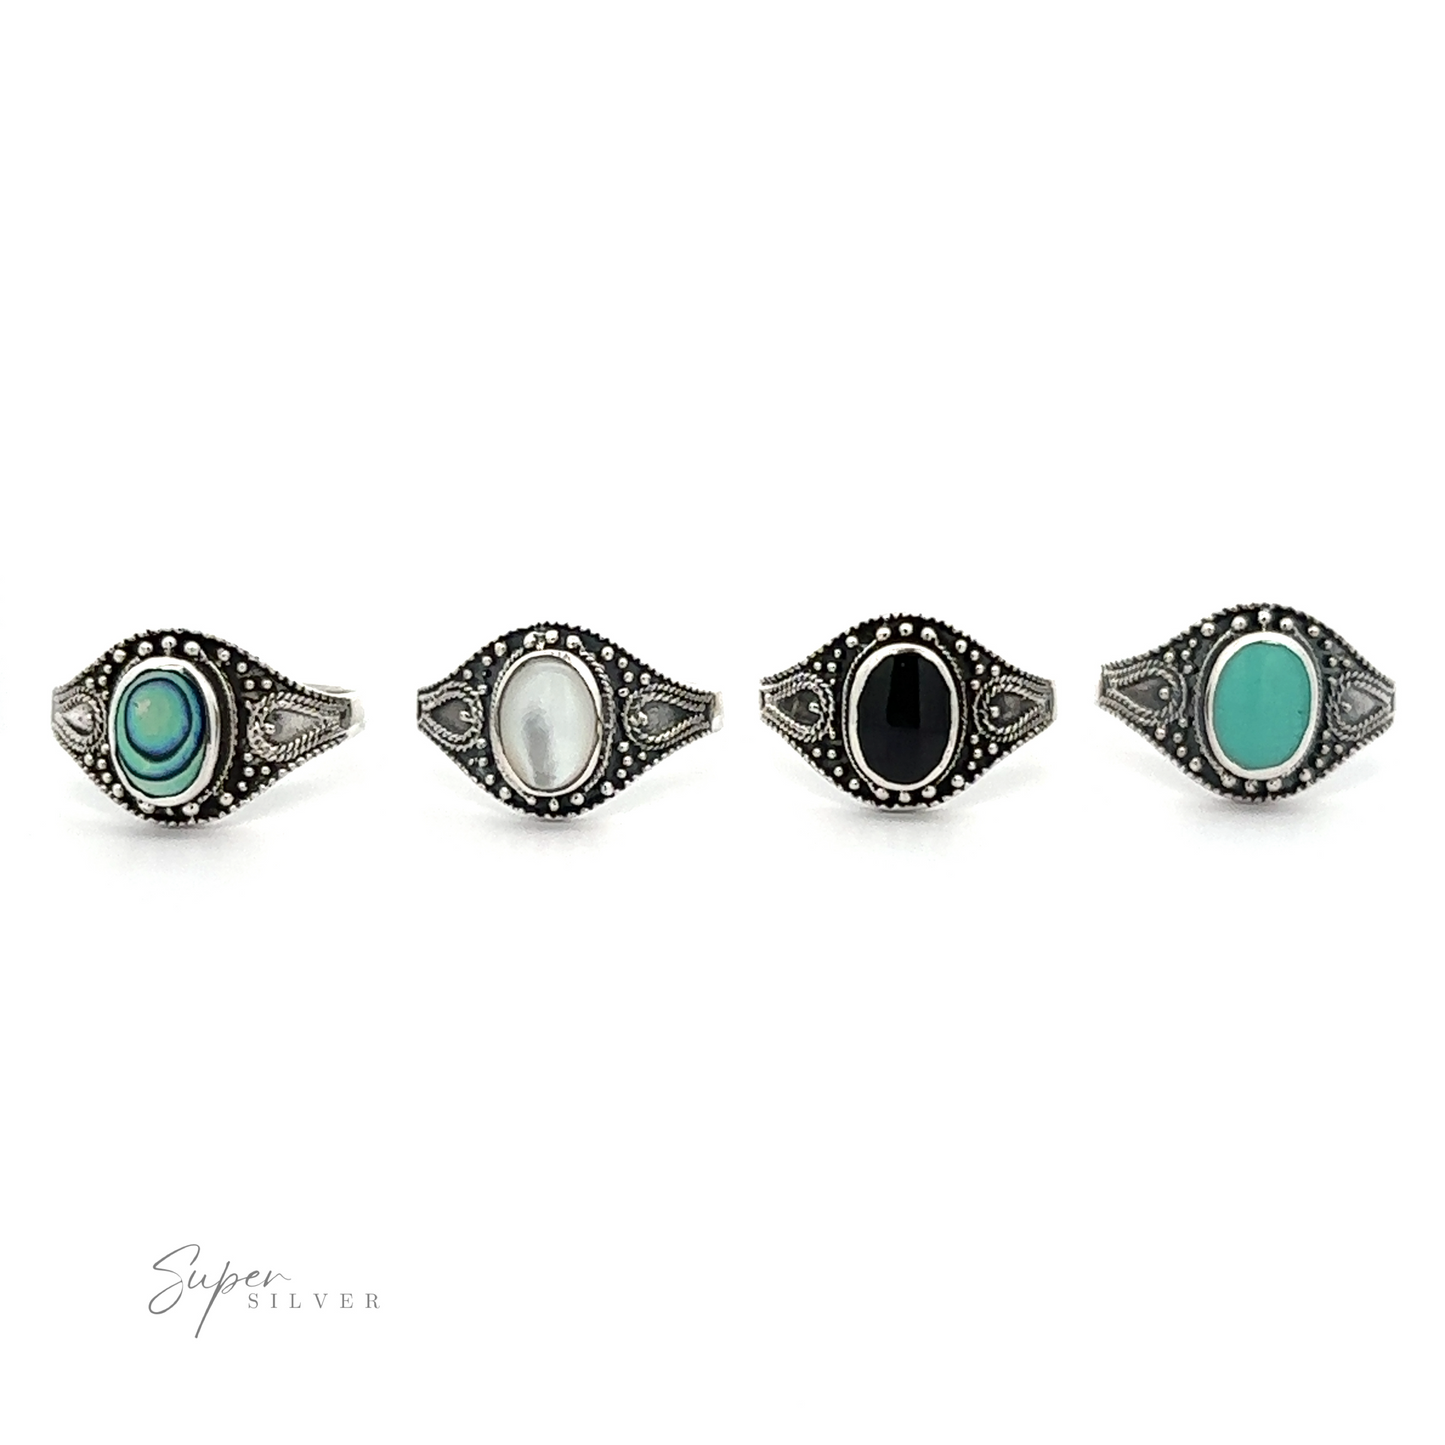 
                  
                    A Vintage Style Oval Shield Ring with Inlaid Stones set featuring oxidized detailing and wide bands.
                  
                